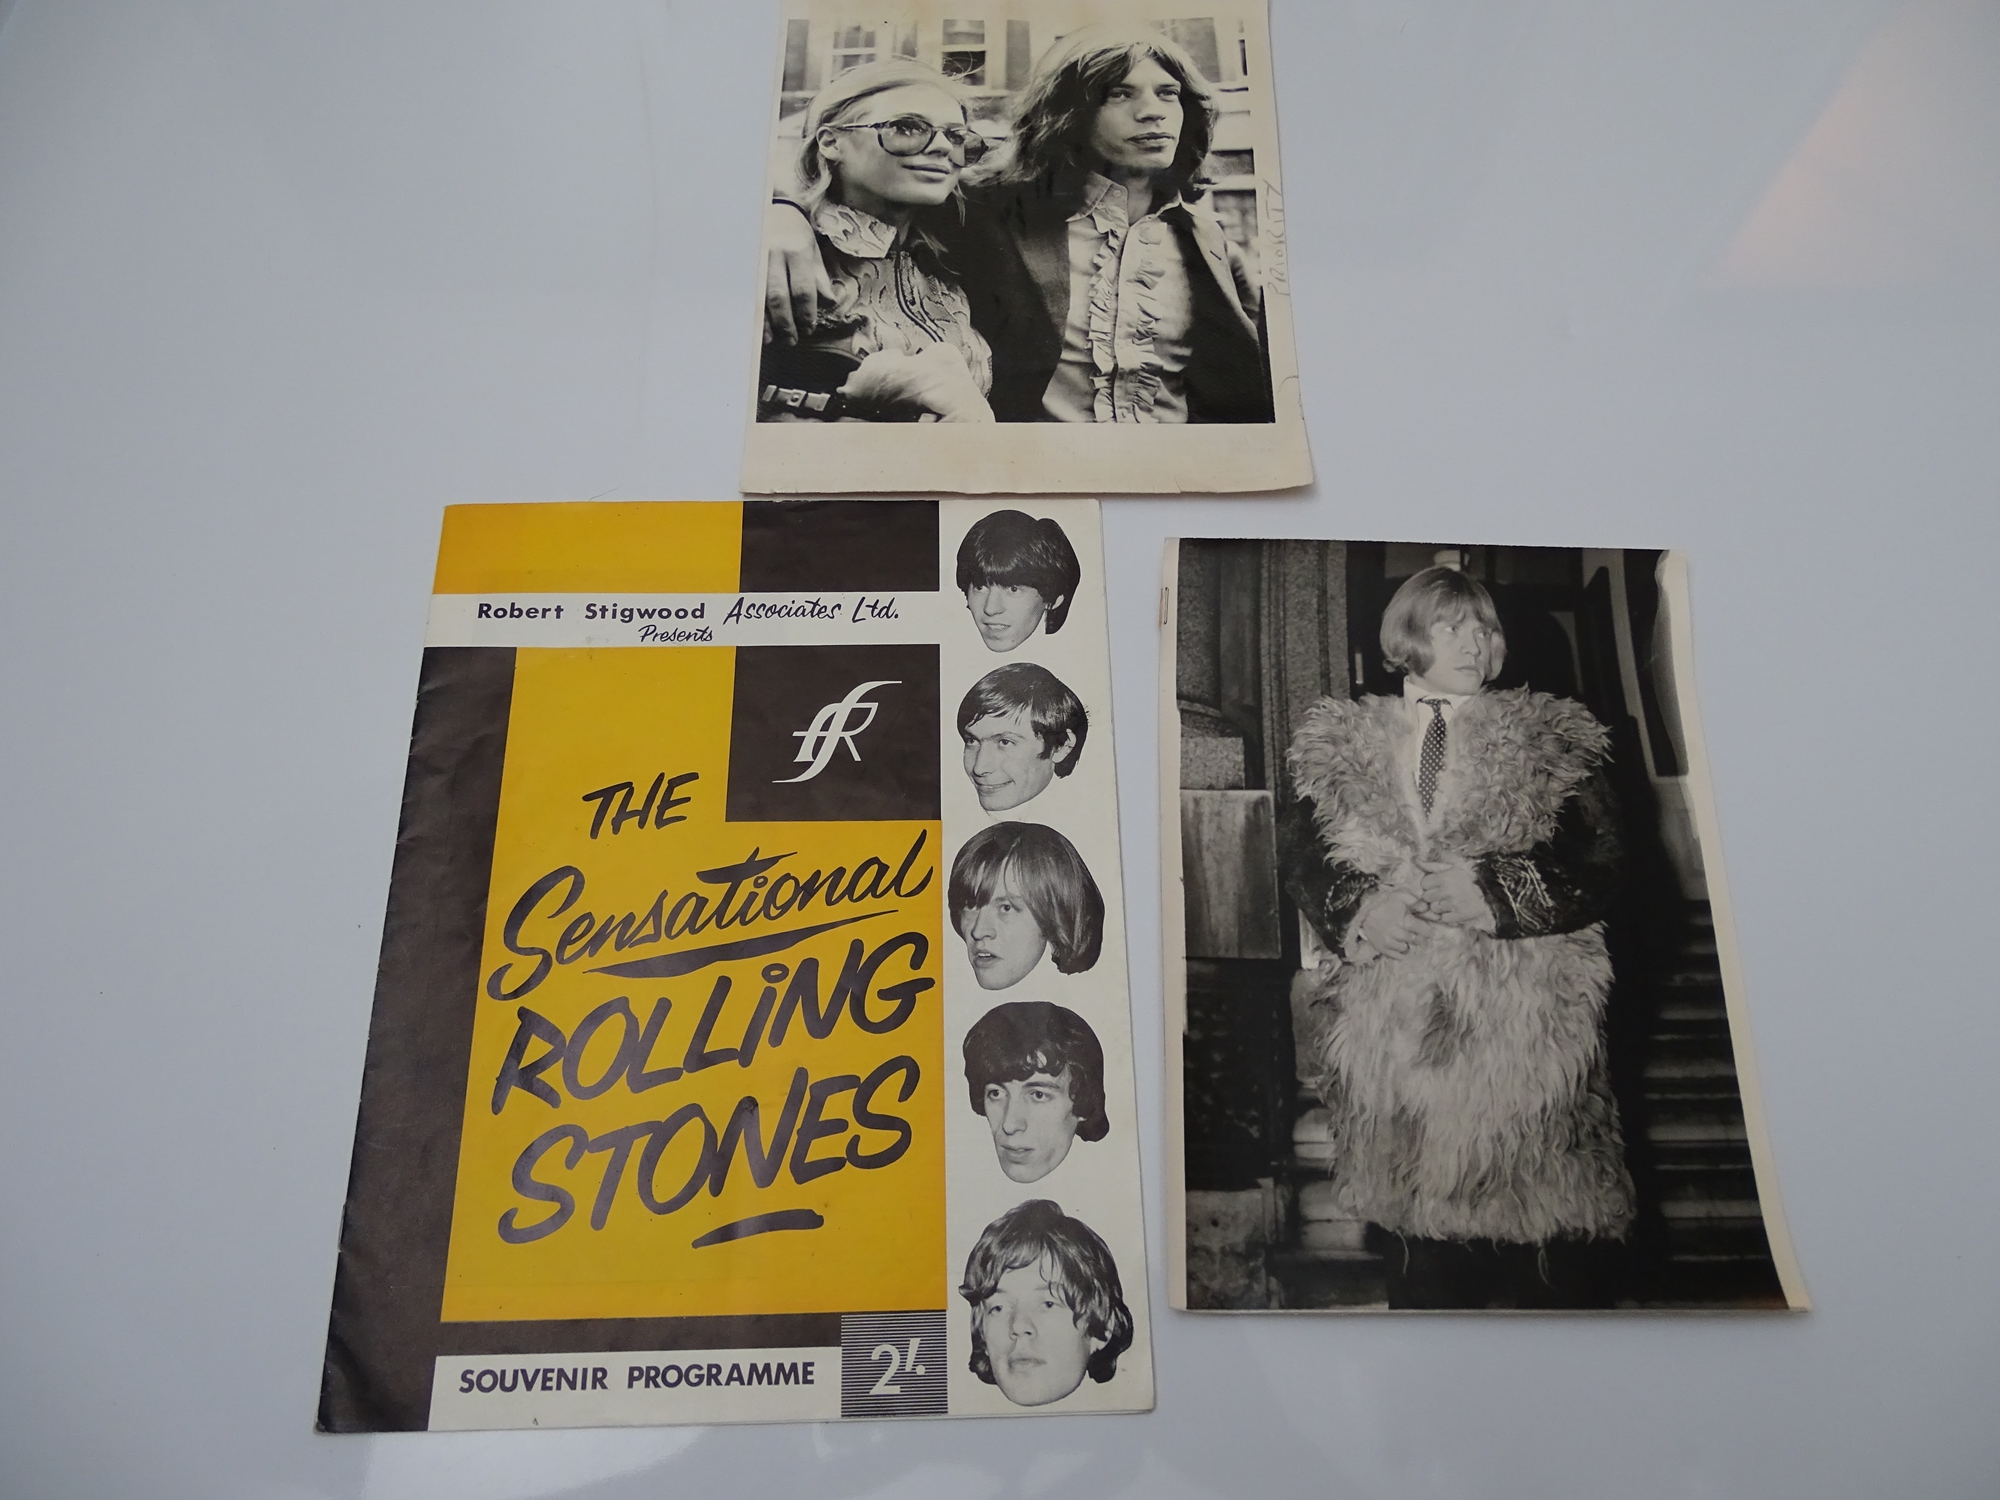 THE ROLLING STONES: 'The Sensational Rolling Stones' 1964 tour souvenir programme presented by